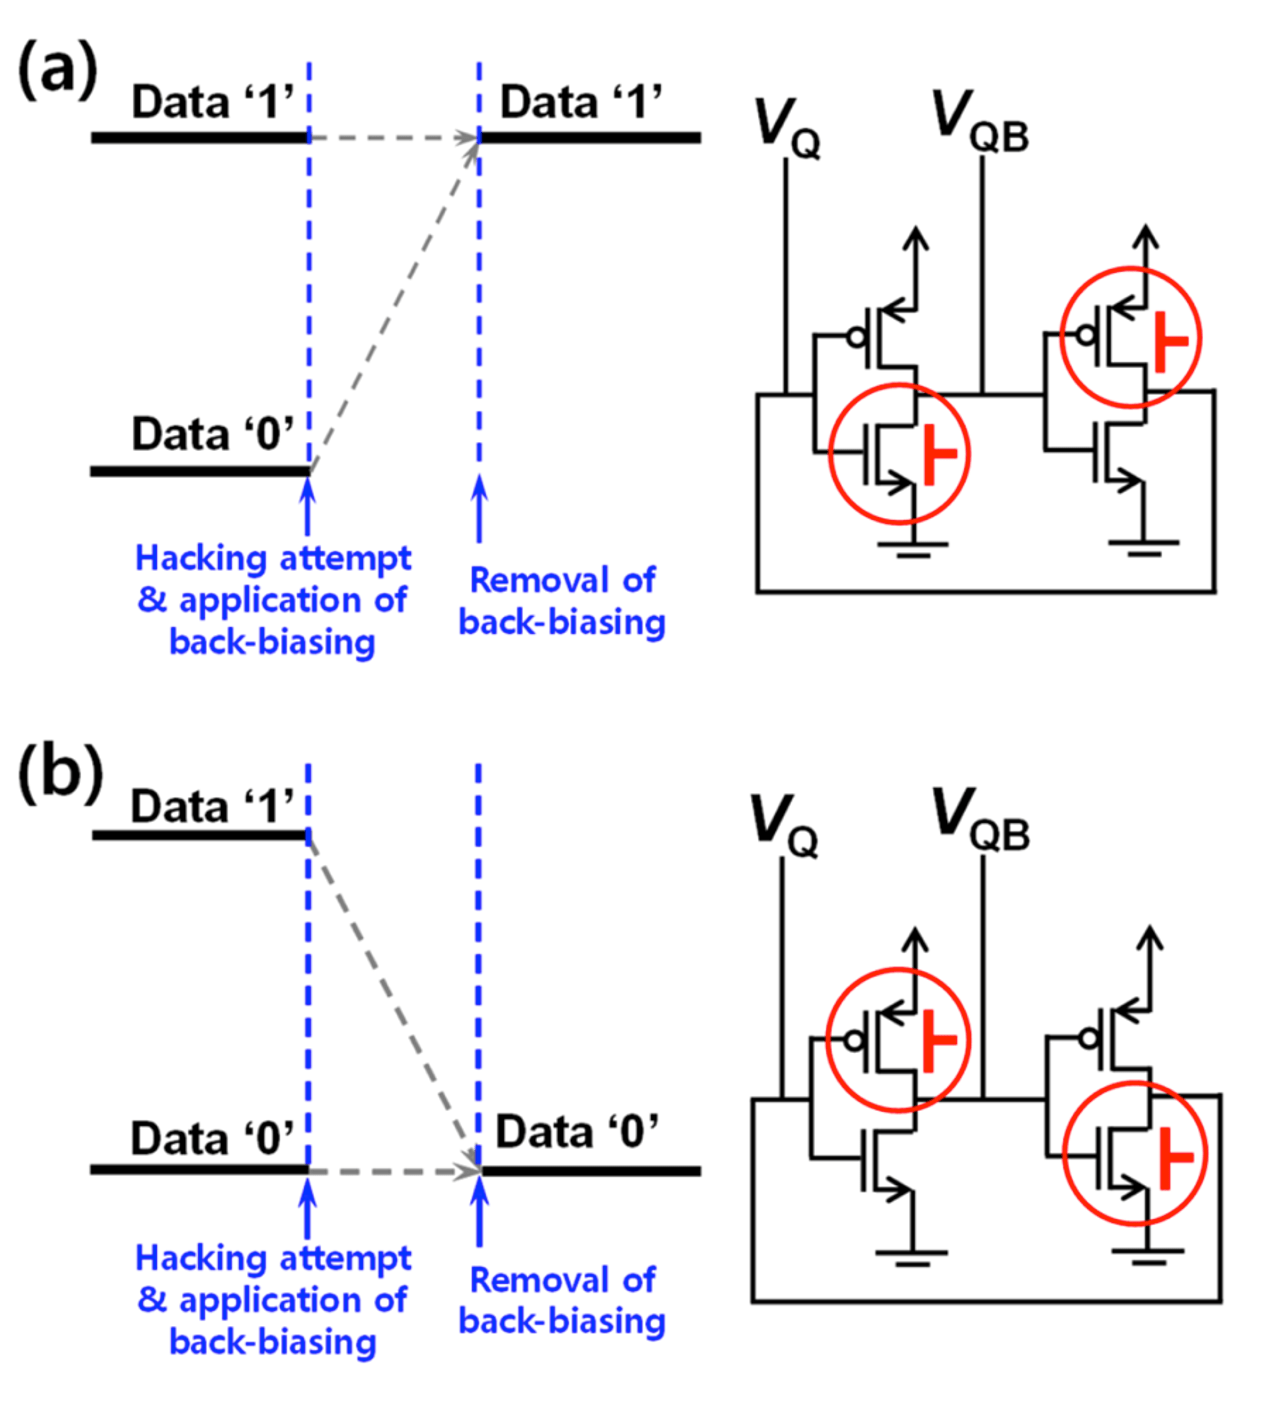 Fig. 1: Asymmetric forward back-biasing scheme for permanent erasing. (a) All the data are reset to 1. (b) All the data are reset to 0. Whether all the data where reset to 1 or 0 is determined by the asymmetric forward back-biasing scheme. Source: KAIST/Creative Commons [2]